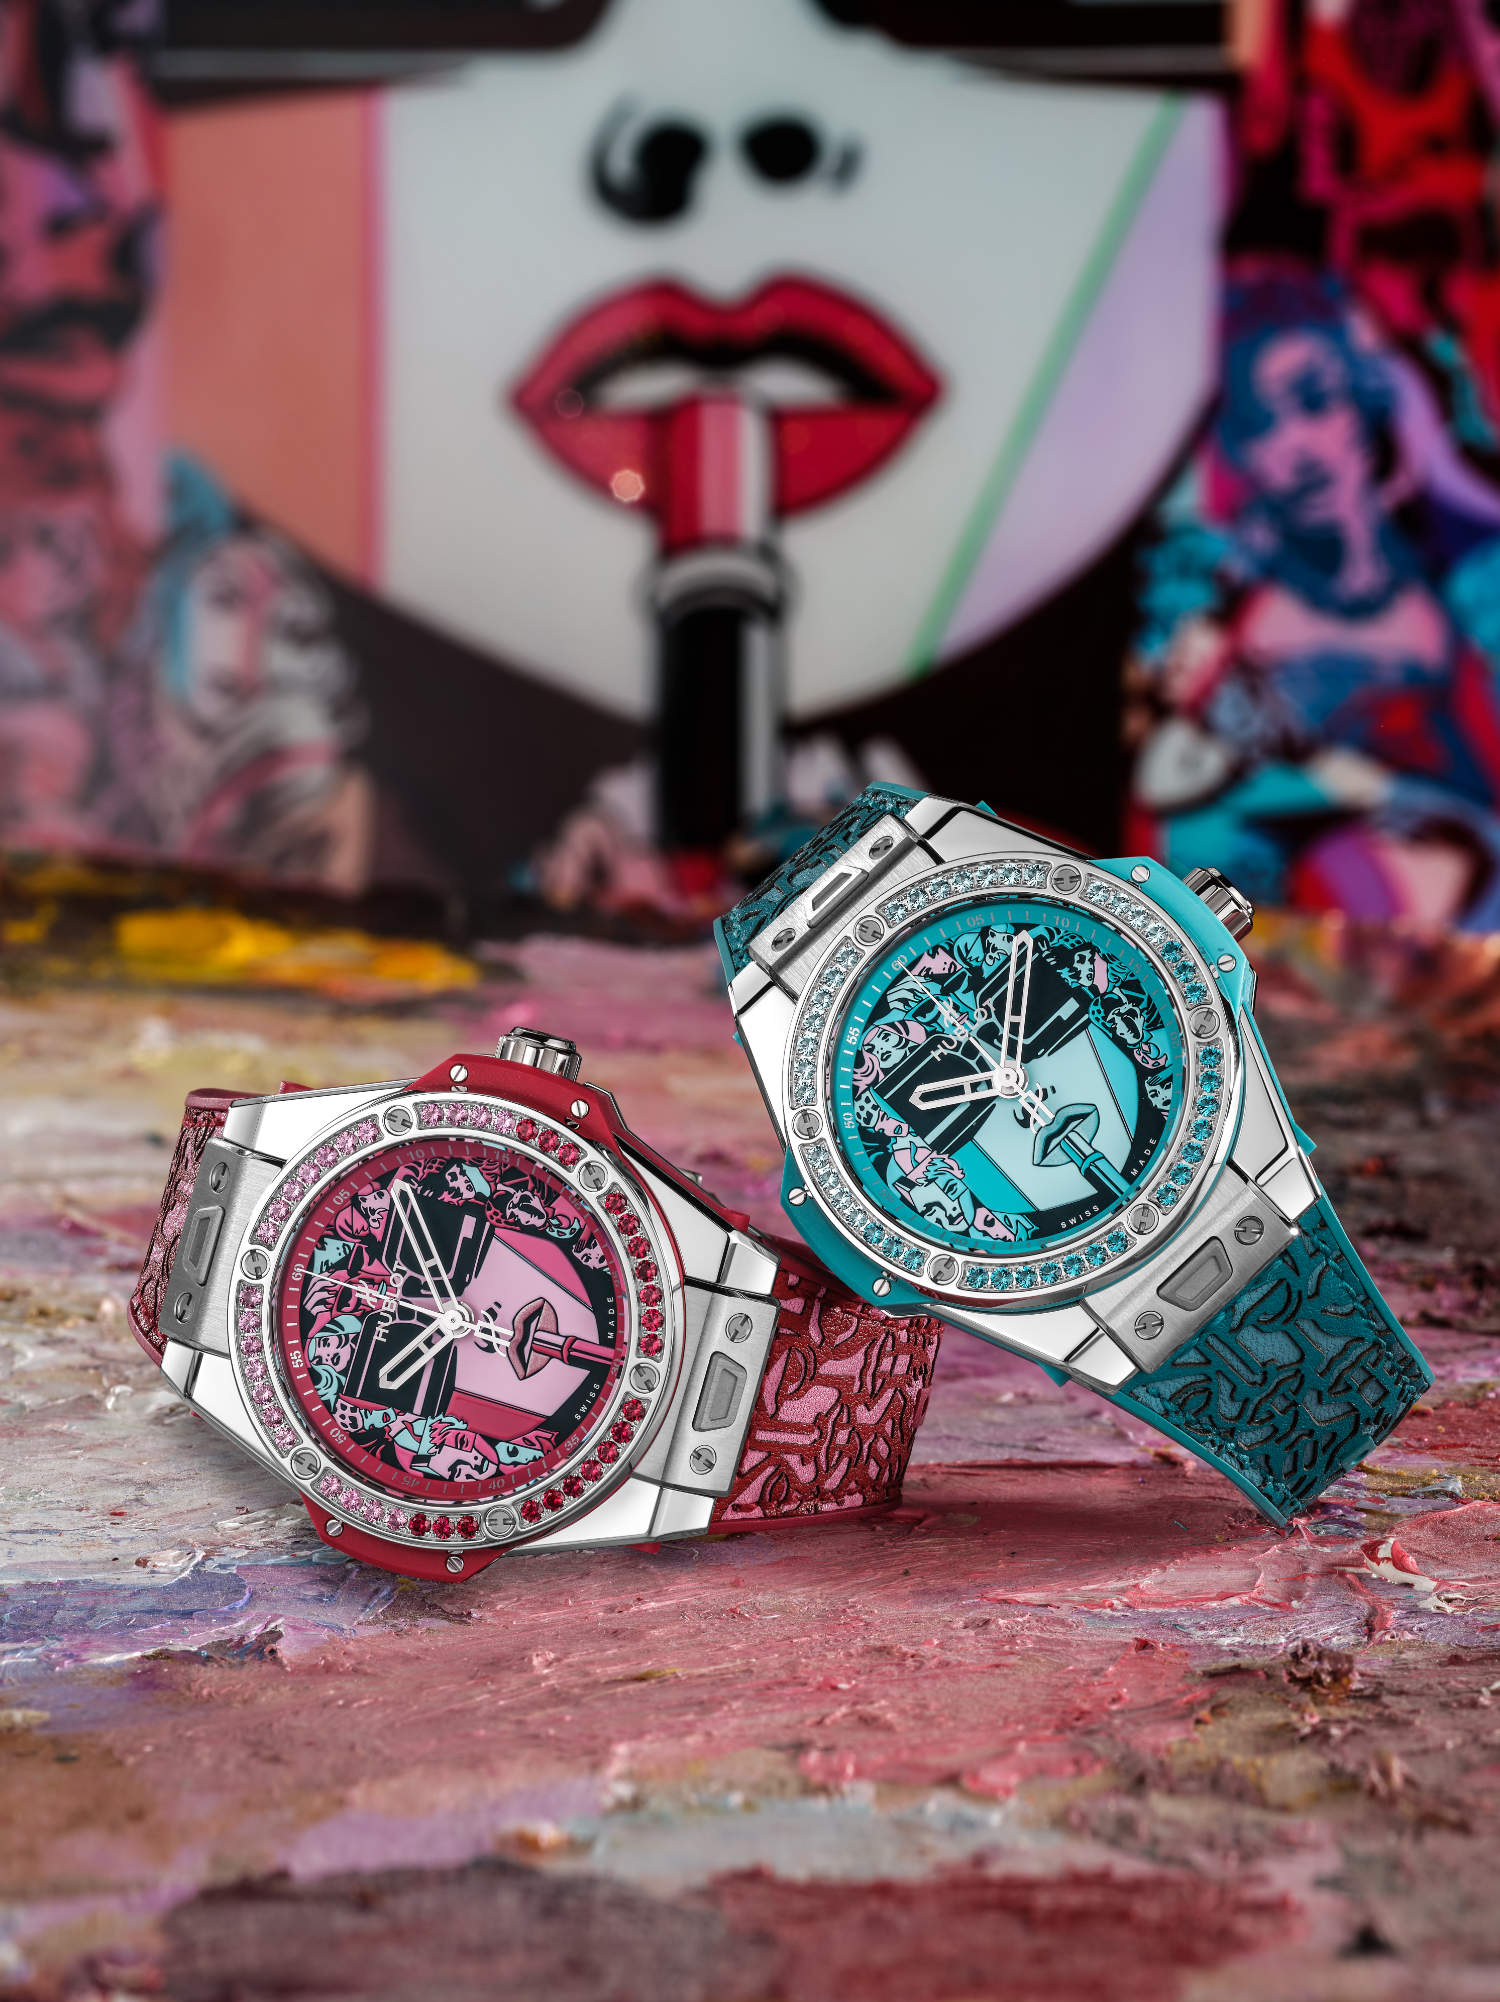 HUBLOT OFFICIAL WATCH OF FIFA WOMEN'S WORLD CUP FRANCE 2019 - PERPETUAL  PASSION